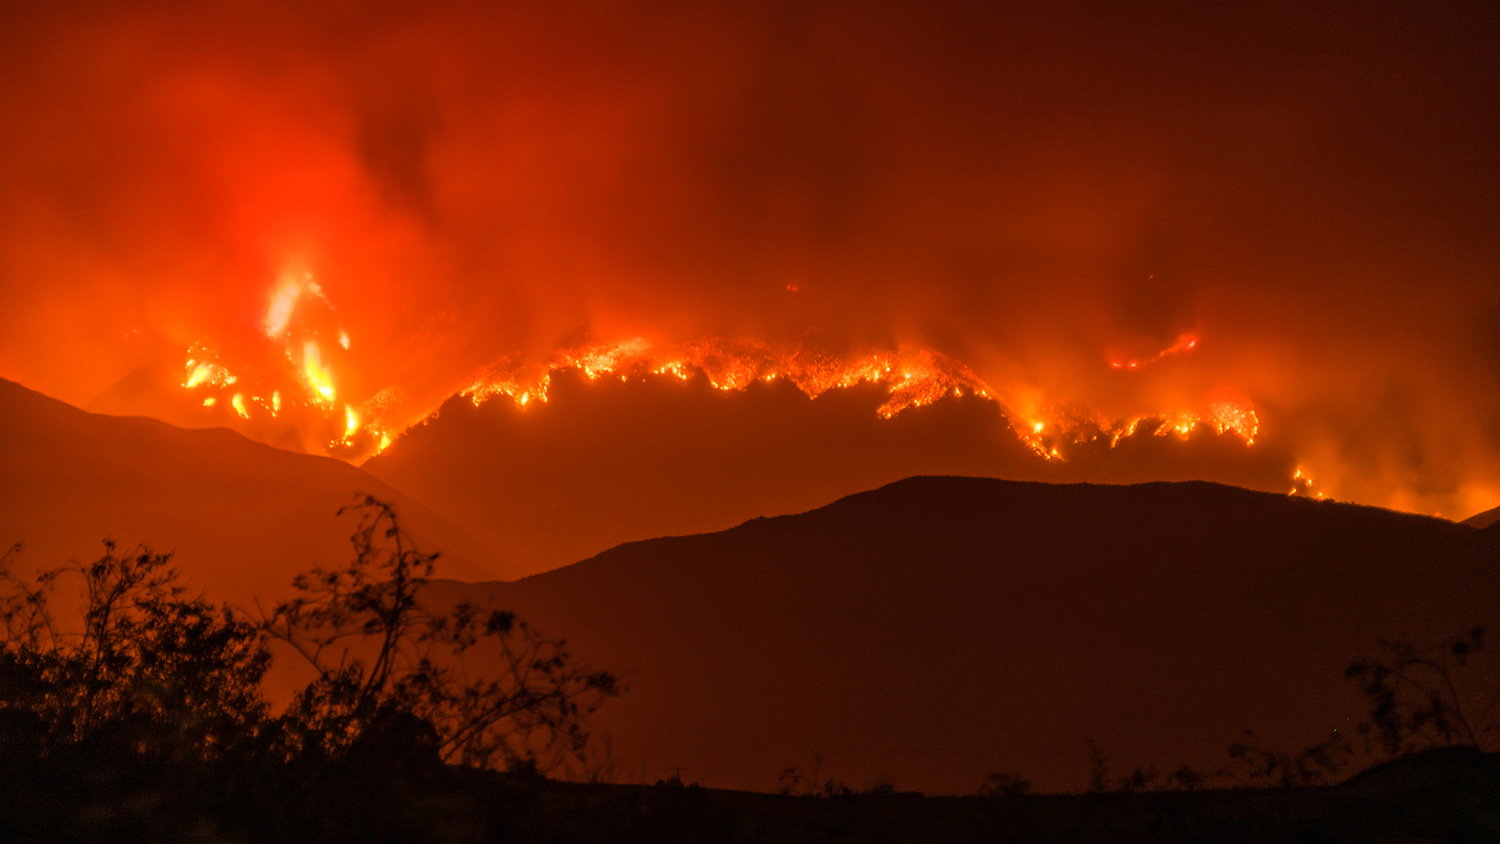 a wildfire in the hills of california